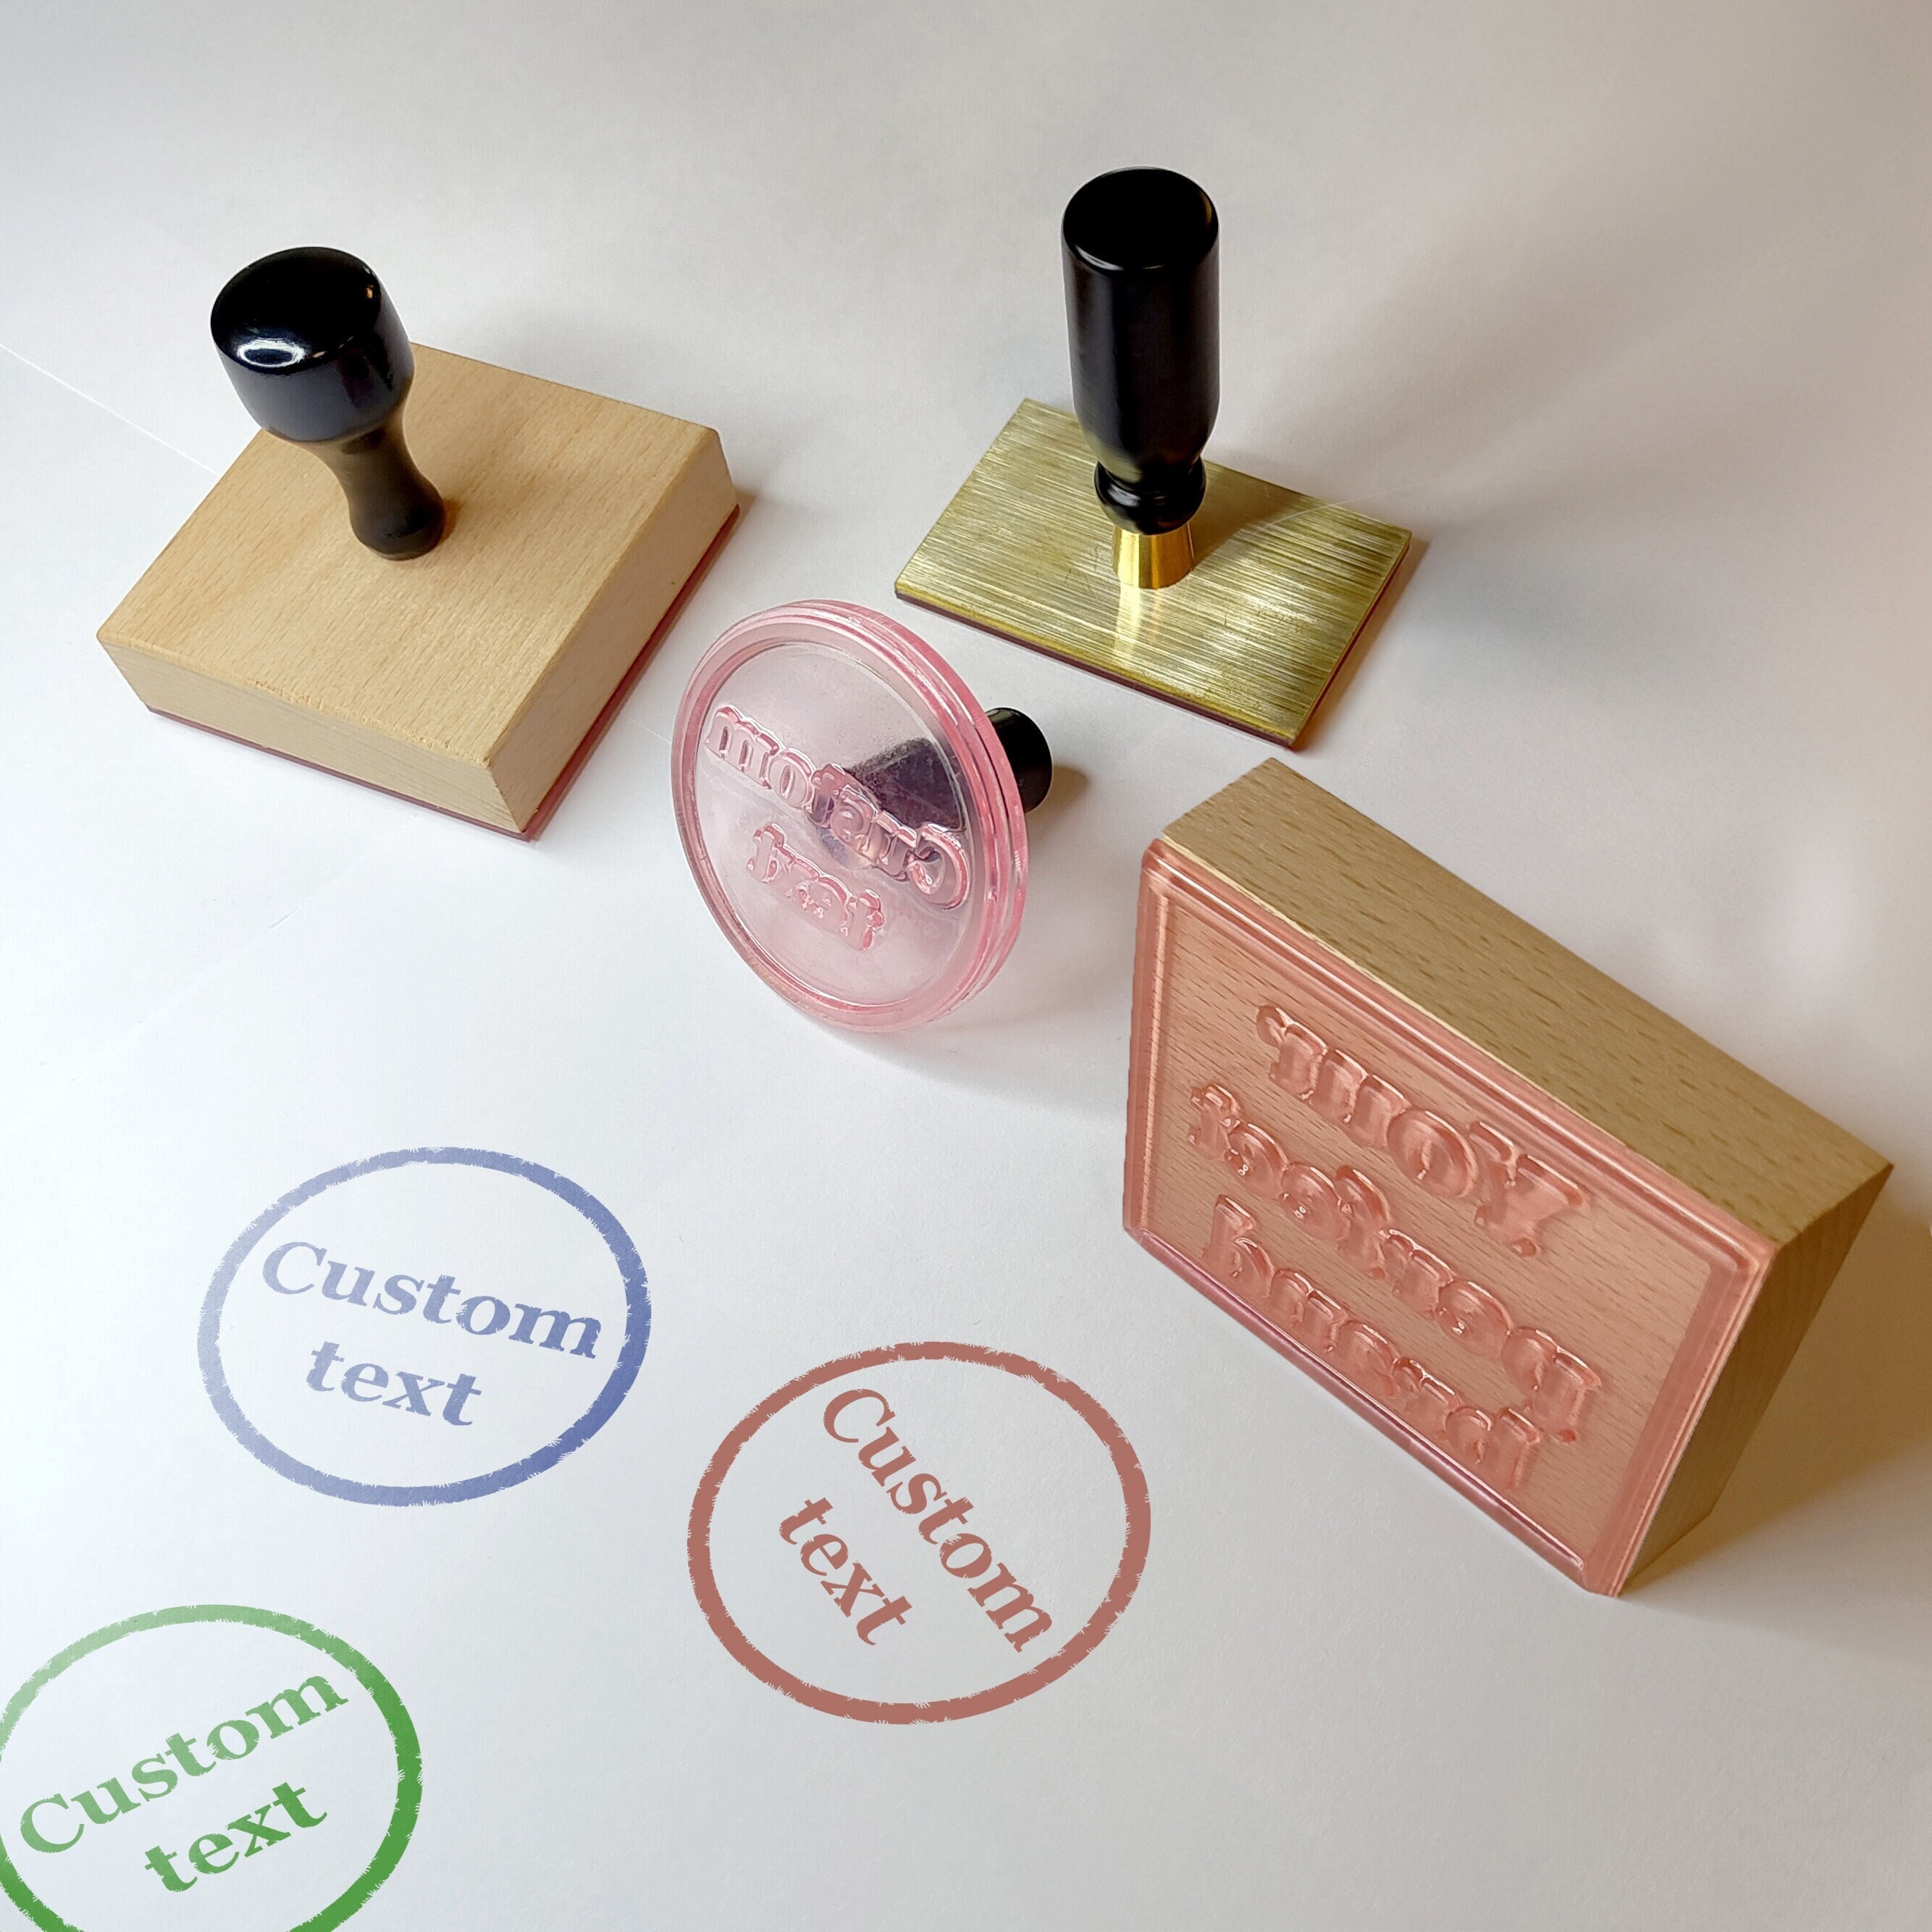 Stamp Carving Kit for Adults how to in English or French